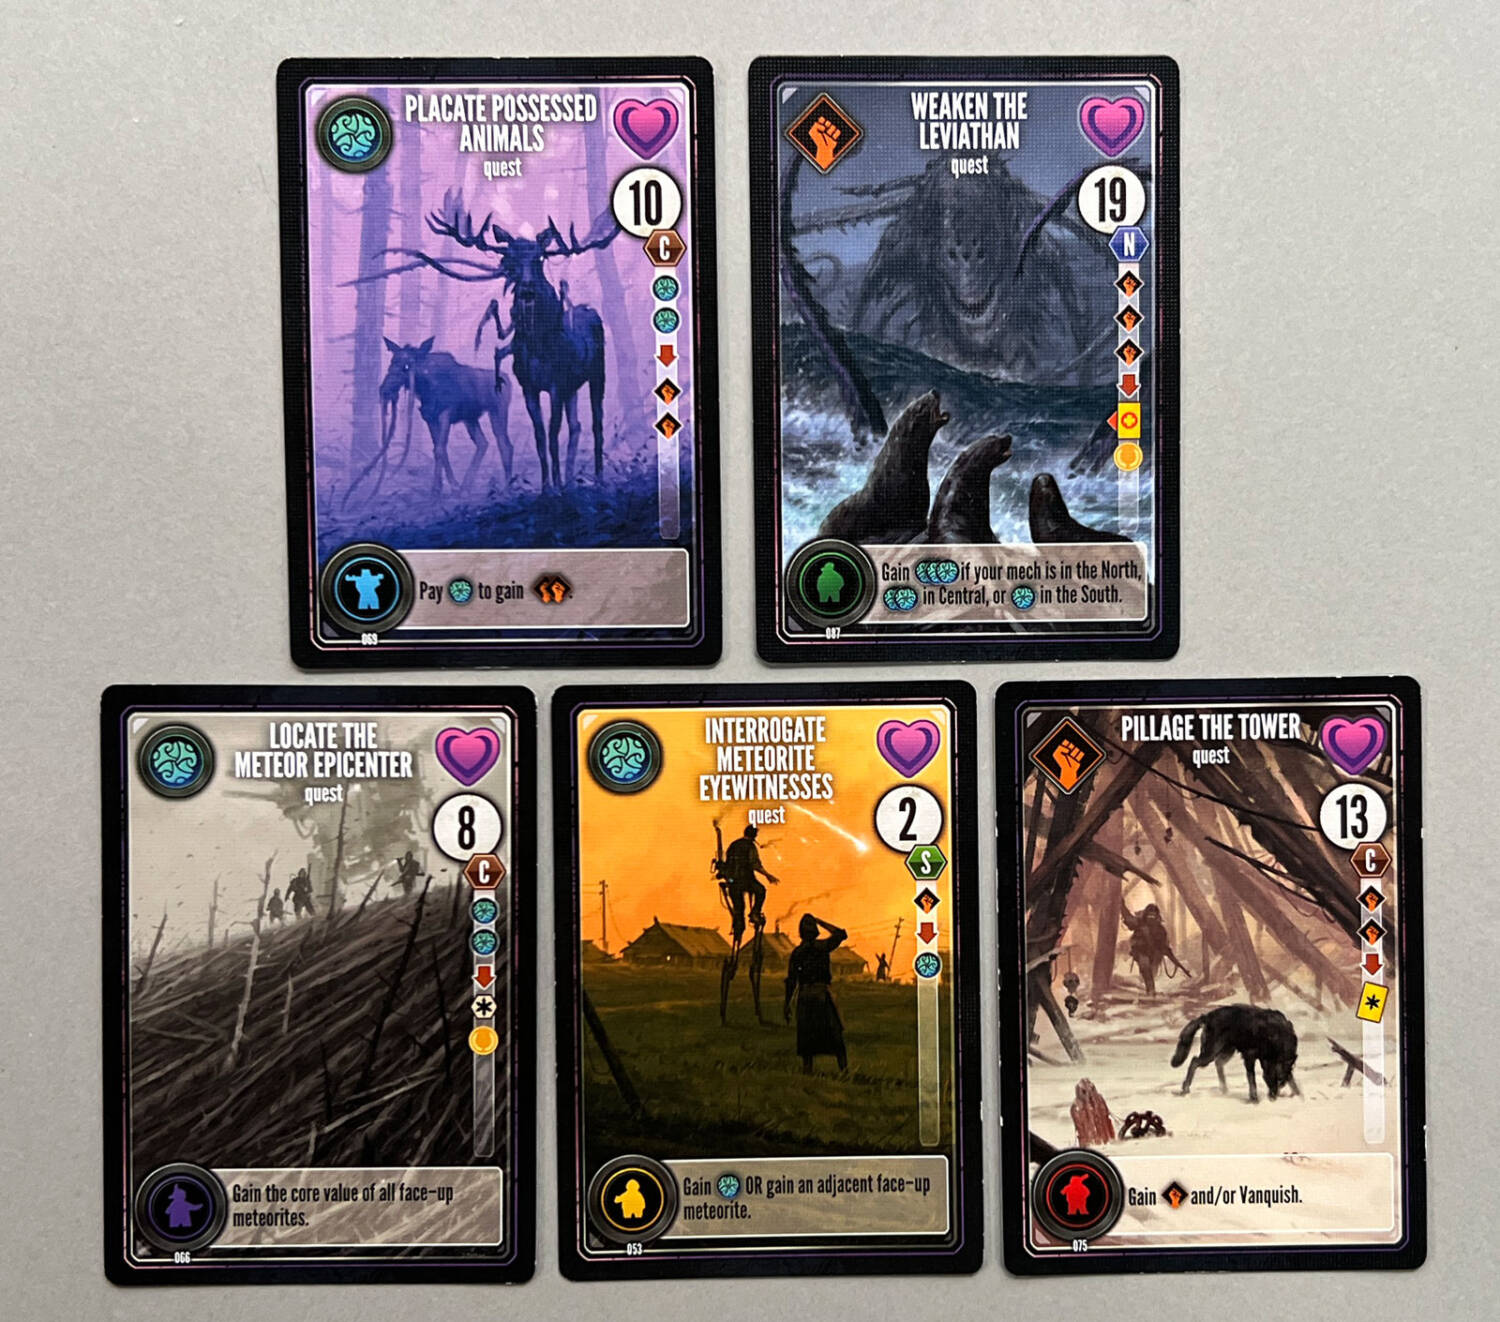 A sampling of Quest cards.